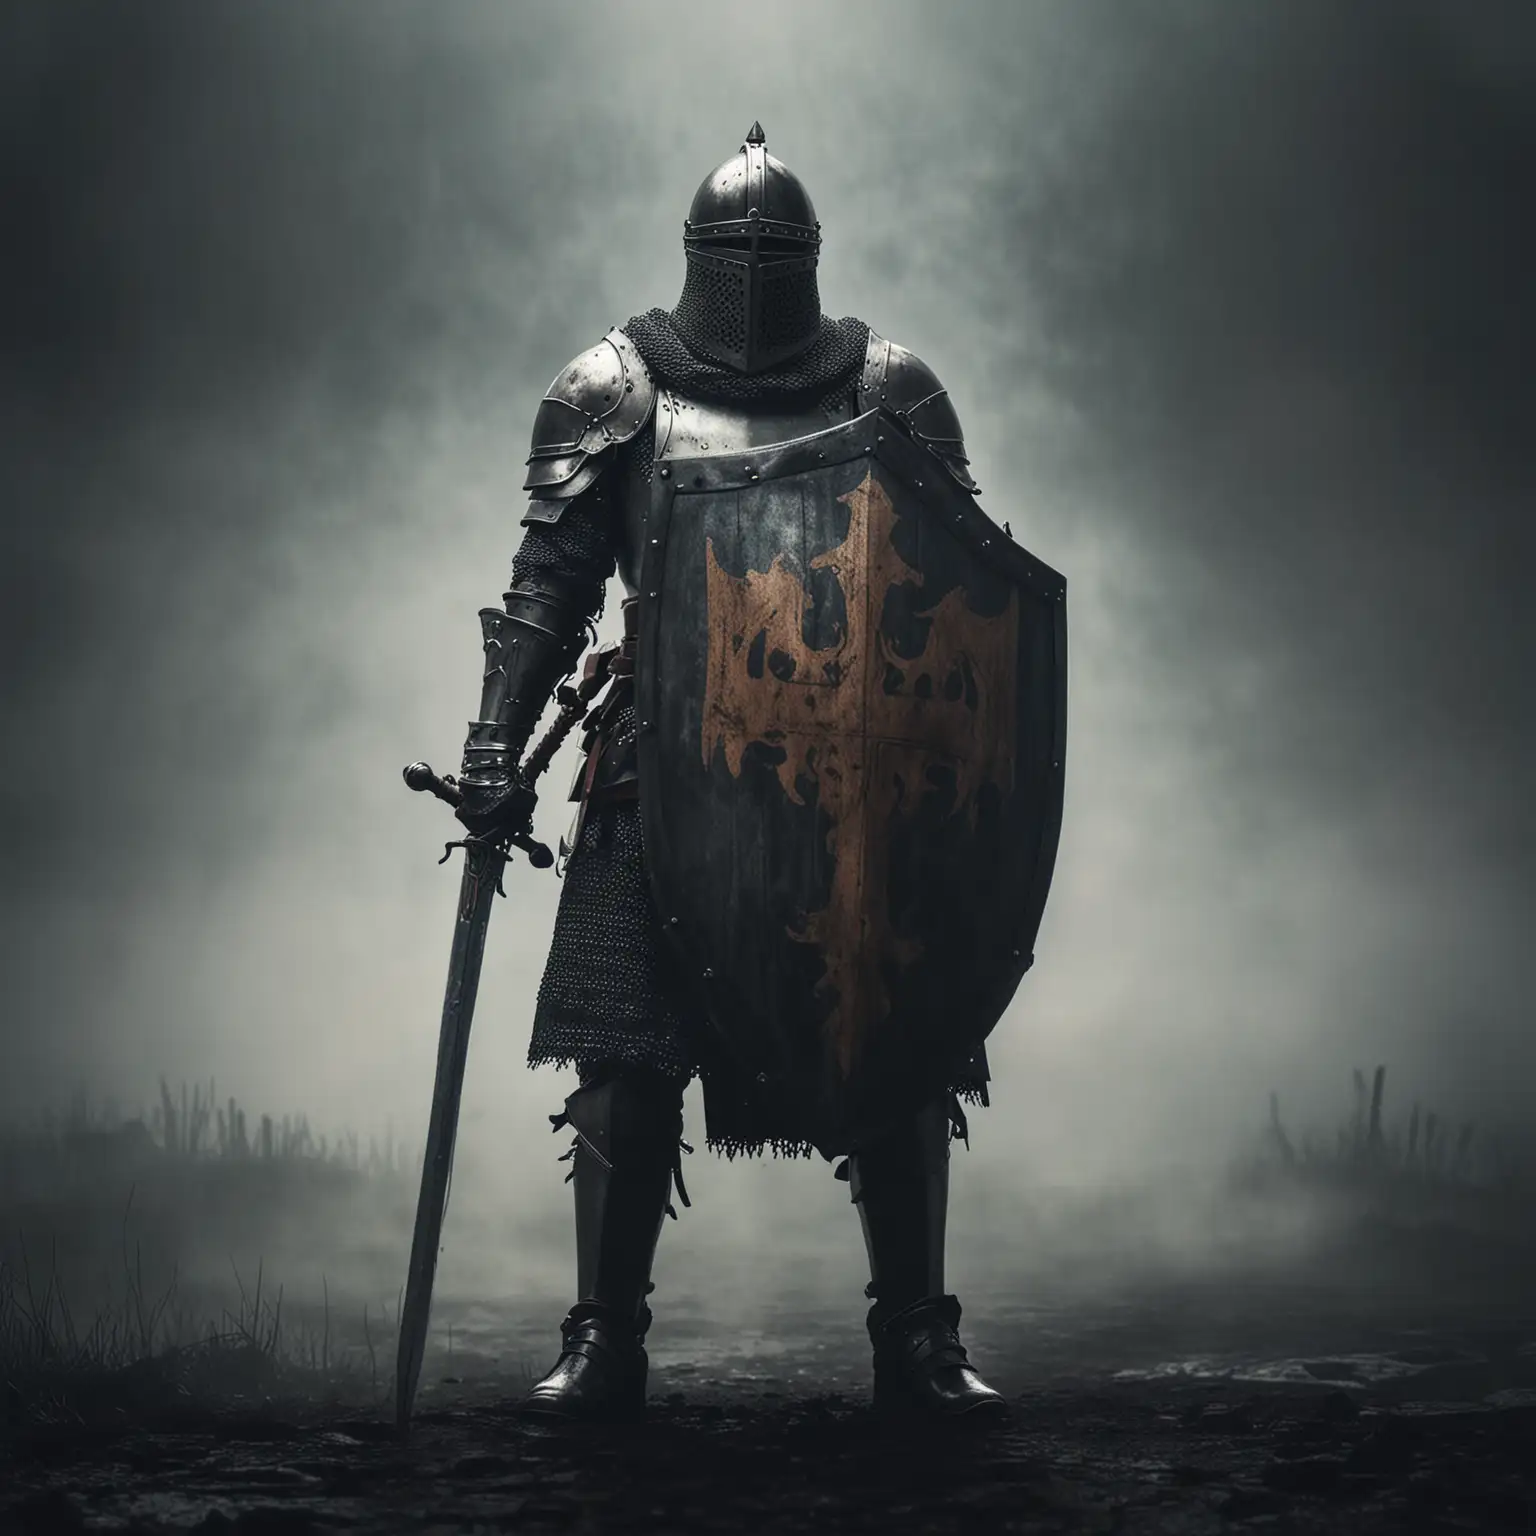 Medieval Knight Standing Guard in a Dark and Misty Environment